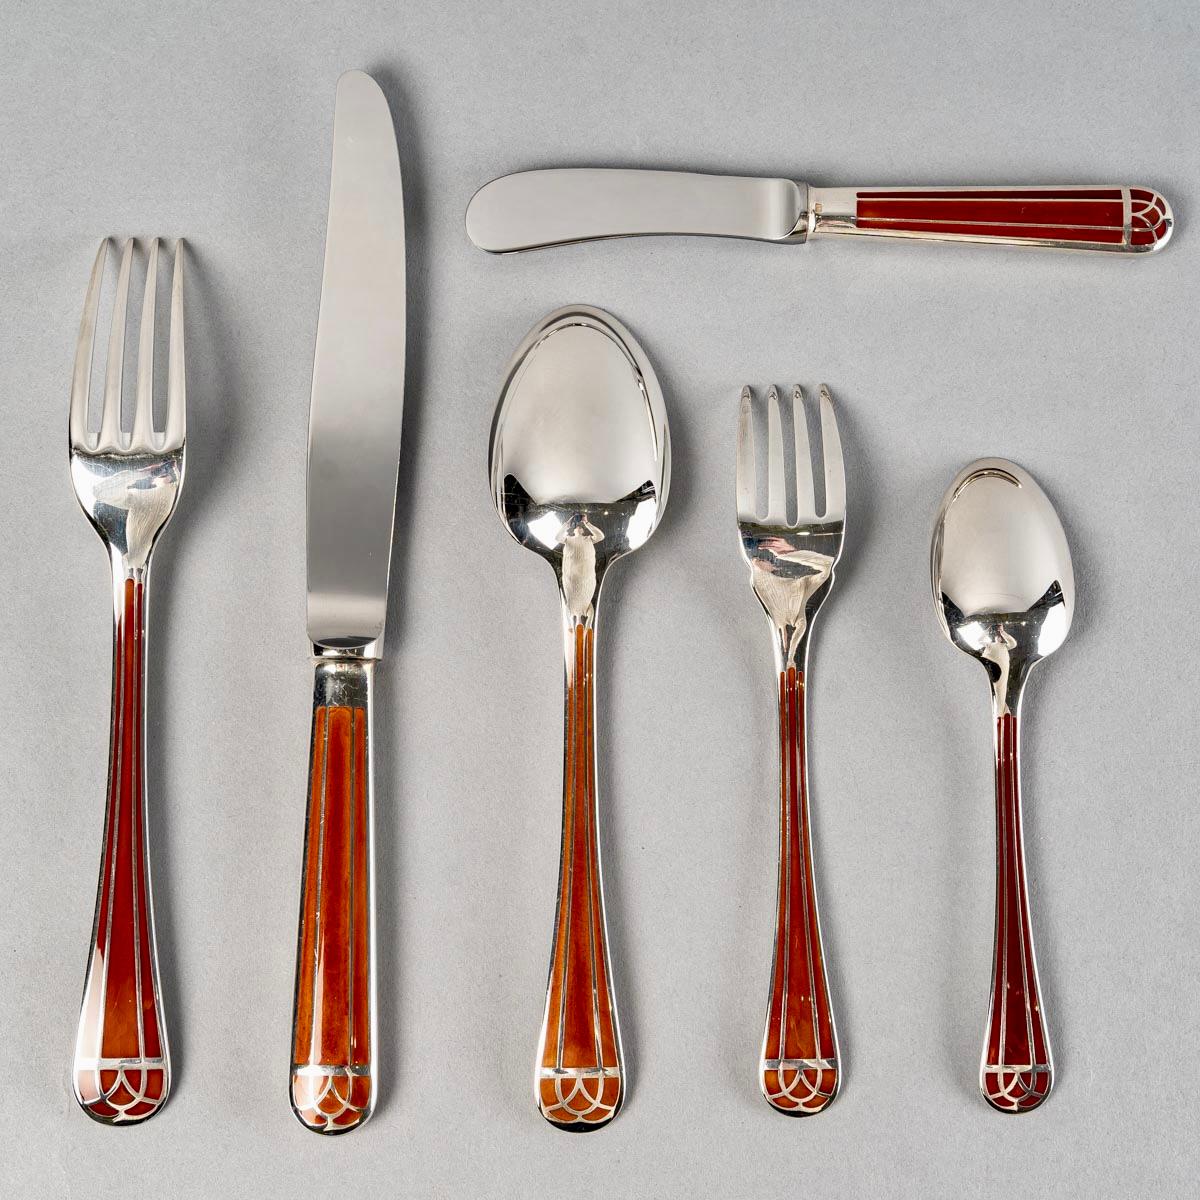 20th Century Christofle Flatware Cutlery Set Talisman Plated Silver & Sienna Lacquer 31 Pces